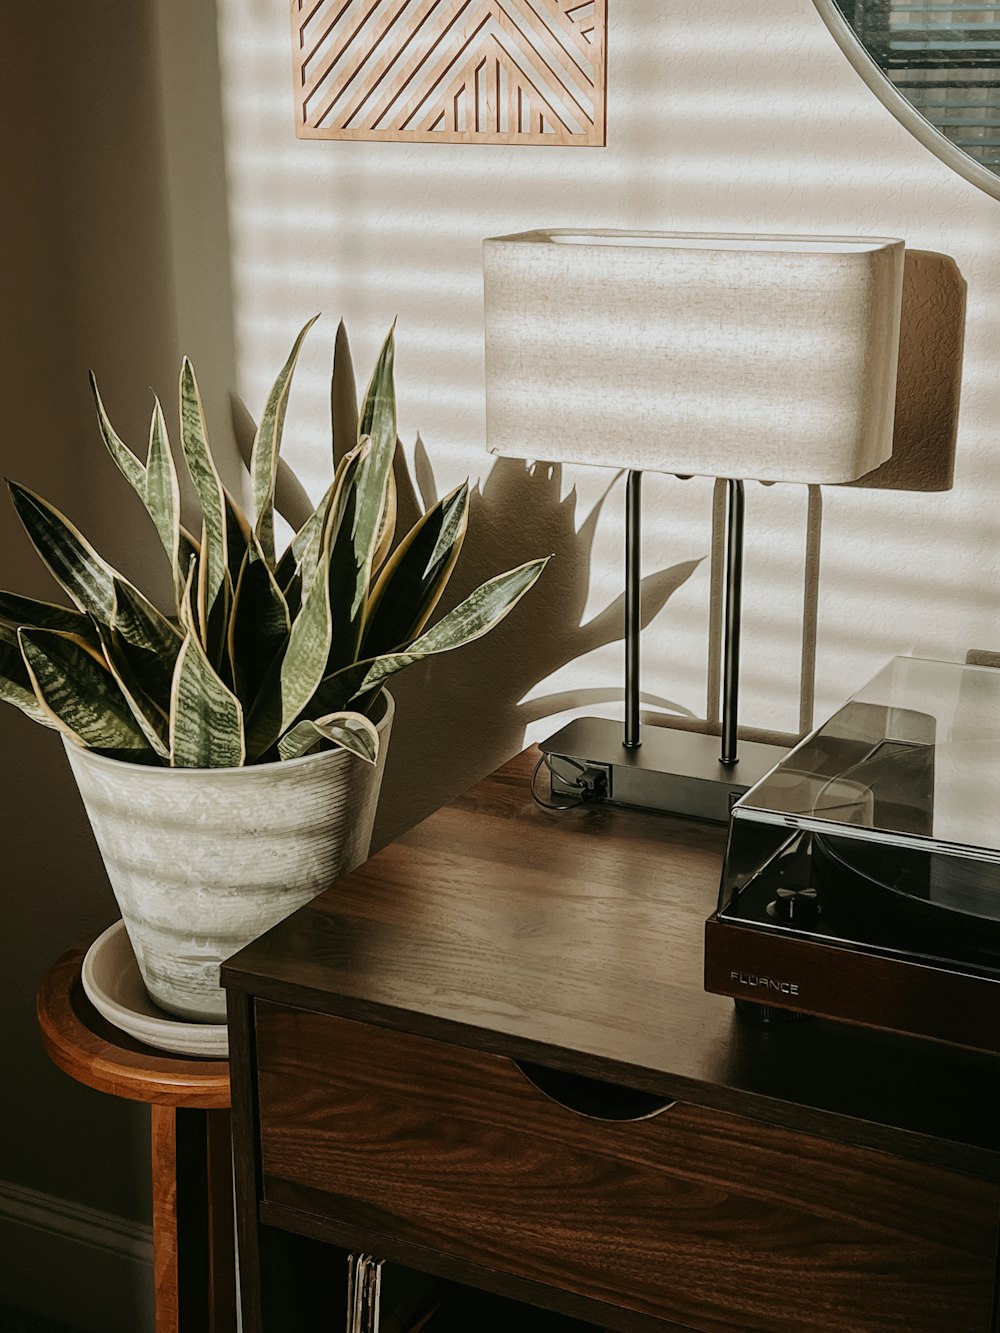 a potted plant sitting on a table next to a lamp